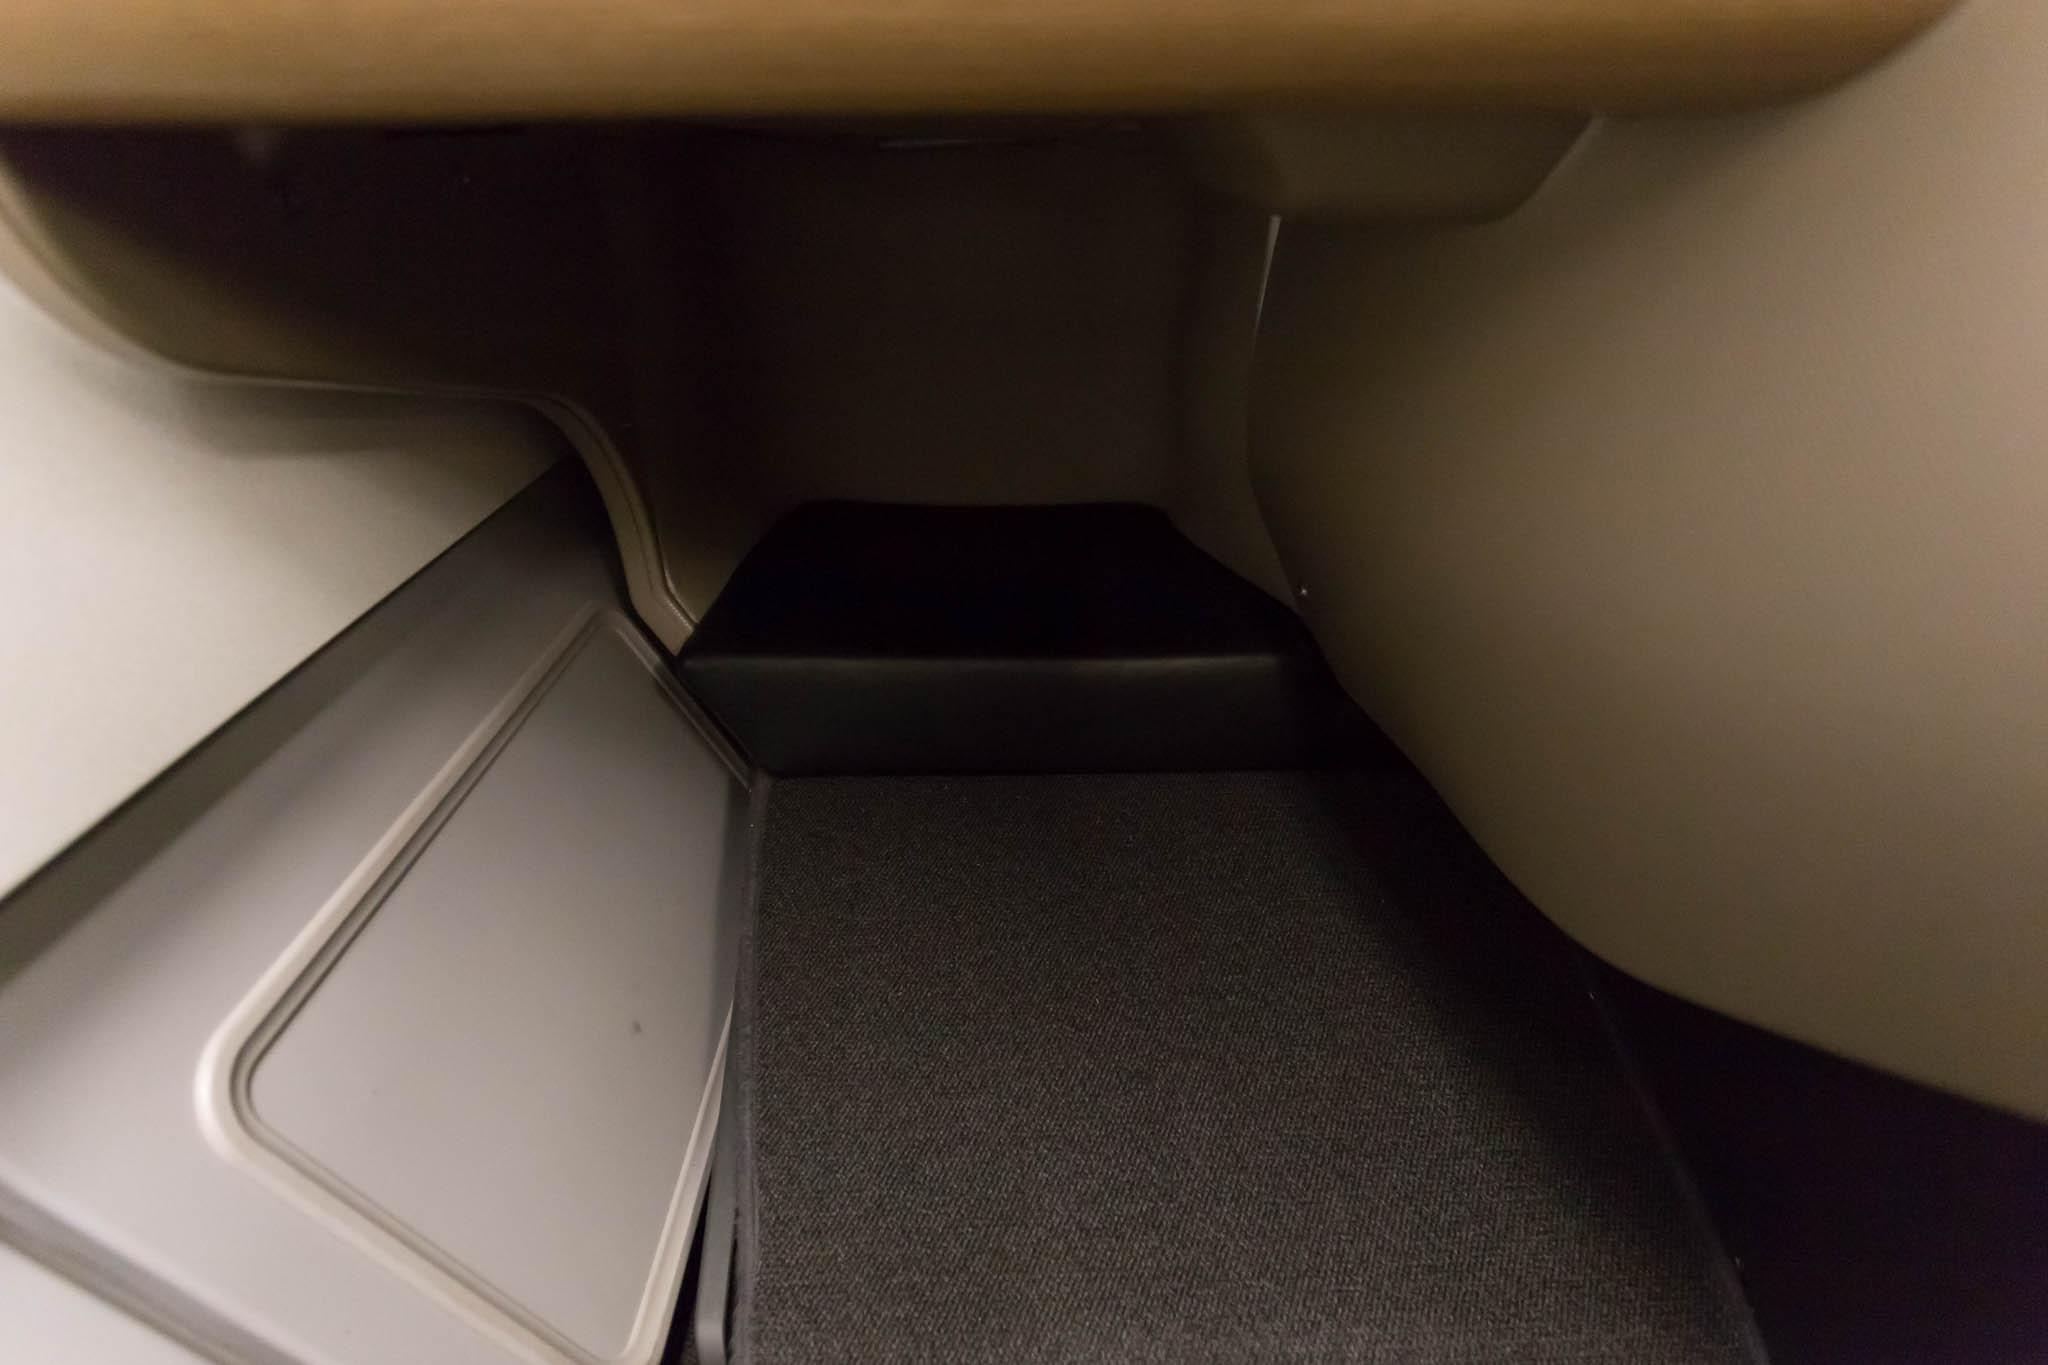 a carpeted floor in a vehicle